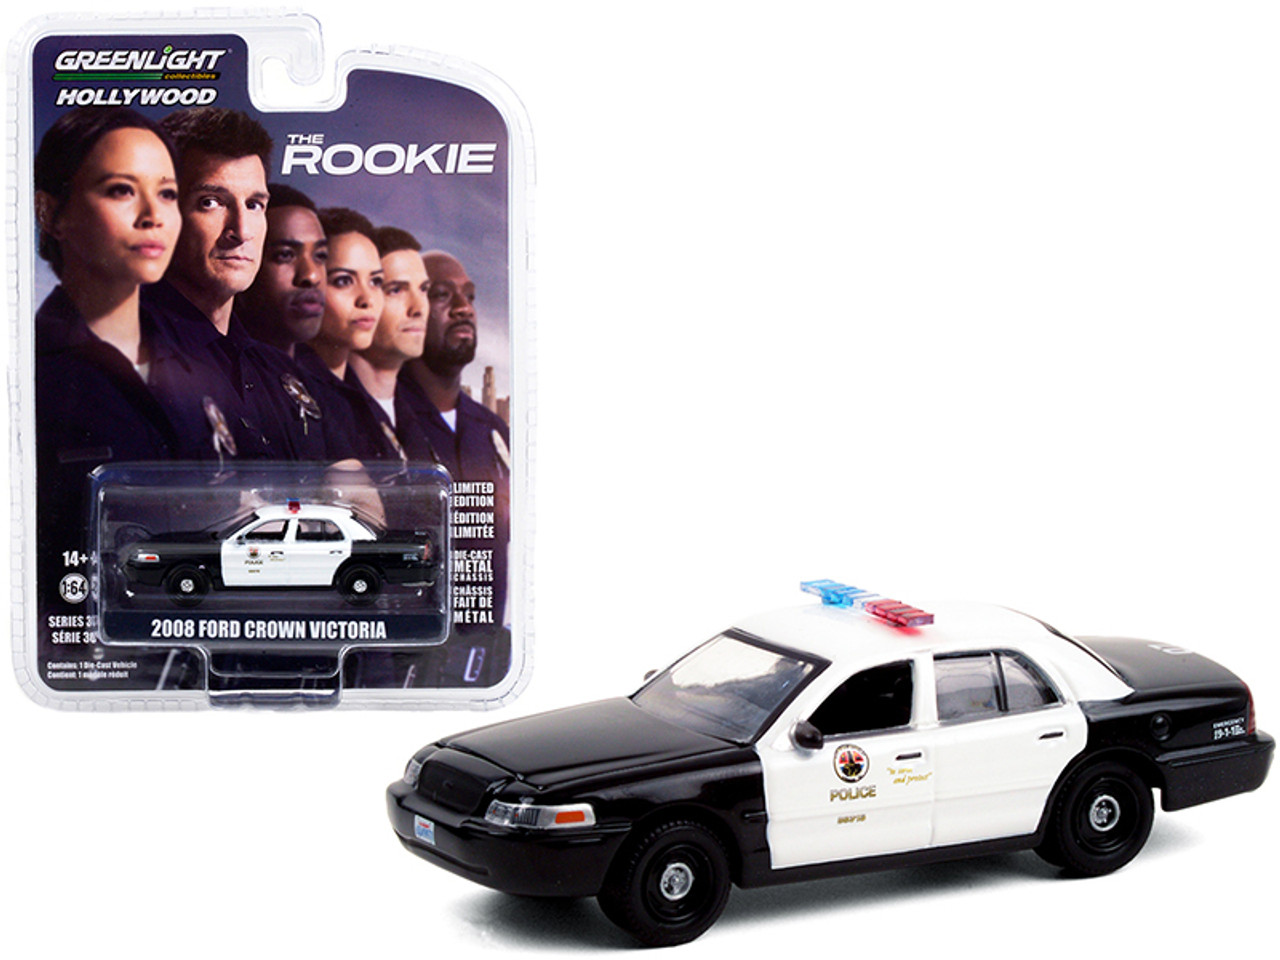 2008 Ford Crown Victoria Police Interceptor Black and White "Los Angeles Police Department" (LAPD) "The Rookie" (2018) TV Series "Hollywood Series" Release 30 1/64 Diecast Model Car by Greenlight